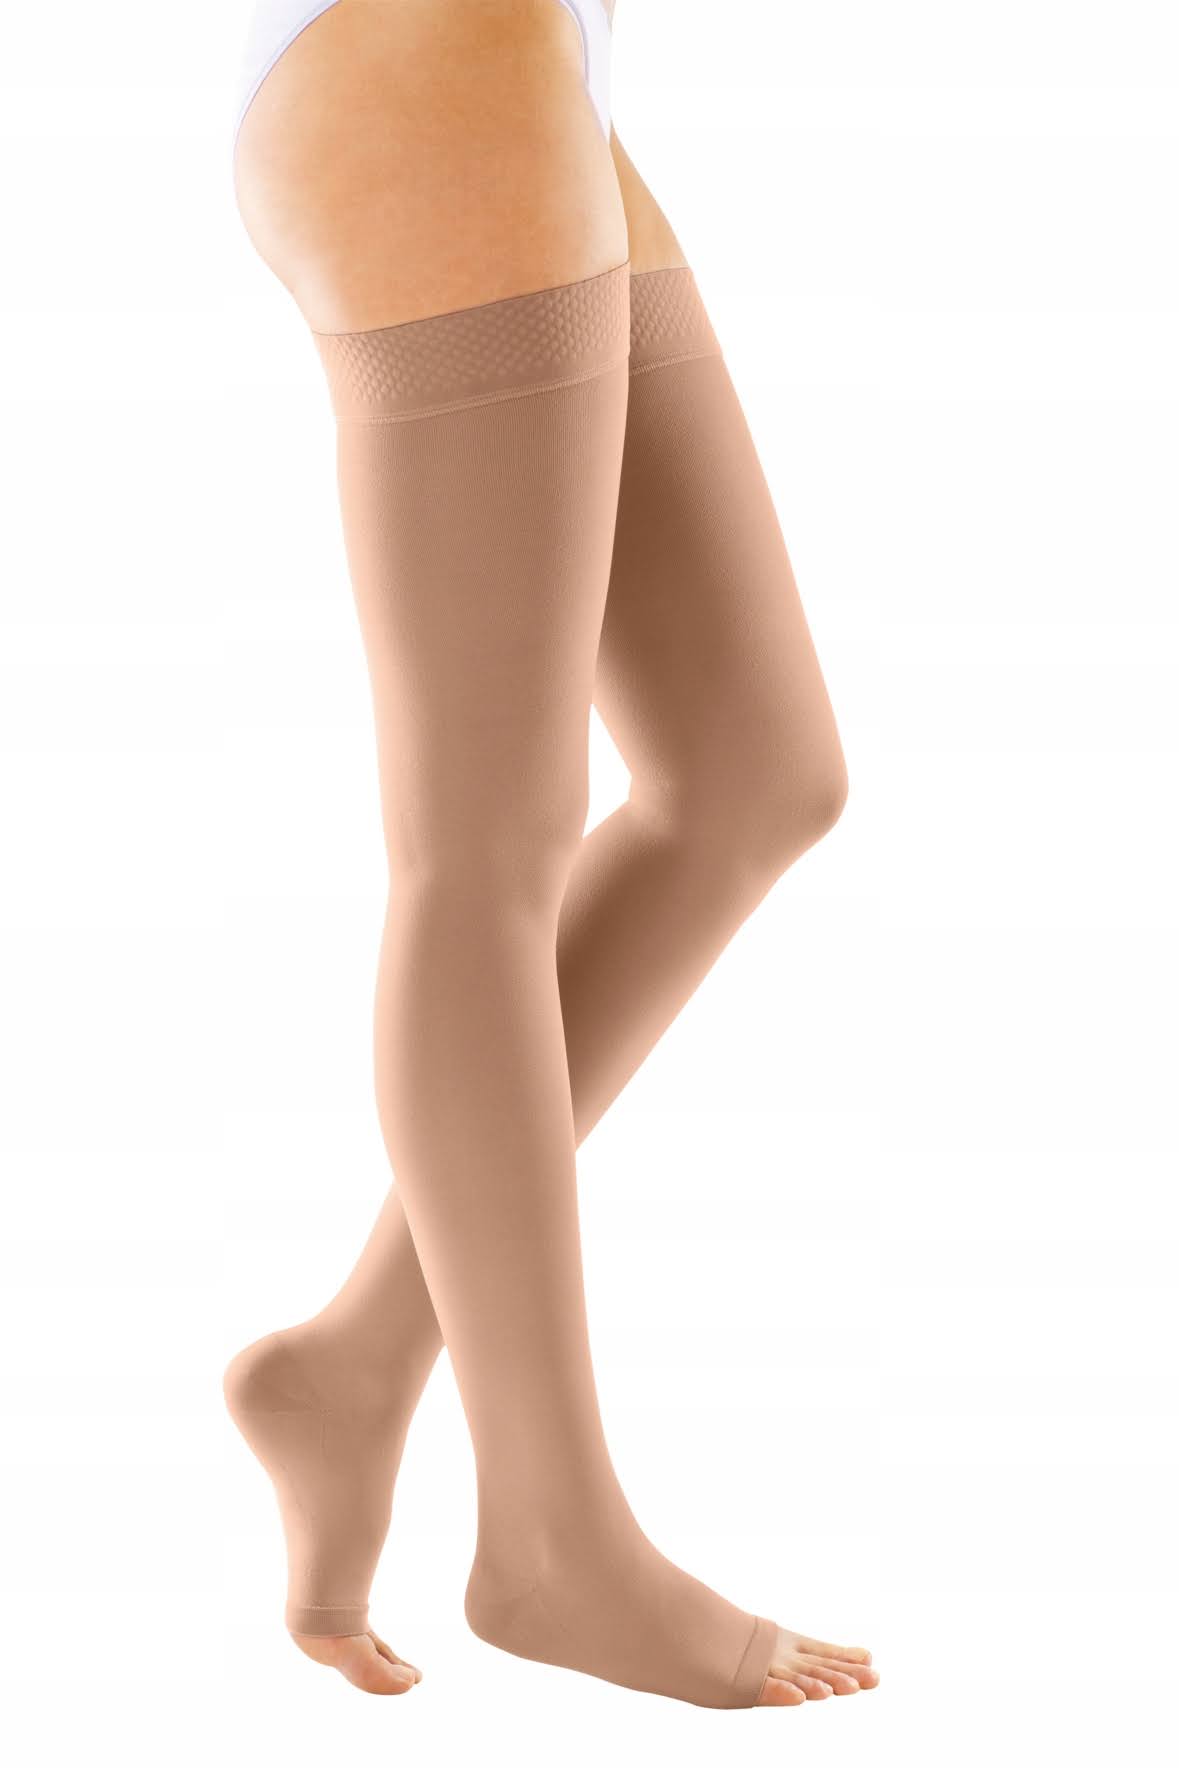 Medi duomed Class 1 & 2 Medical Compression Stockings For DVT, Edema, Ted & Varicose, Ccl 2 (23-32 mmHg) Prescription Only / Medium